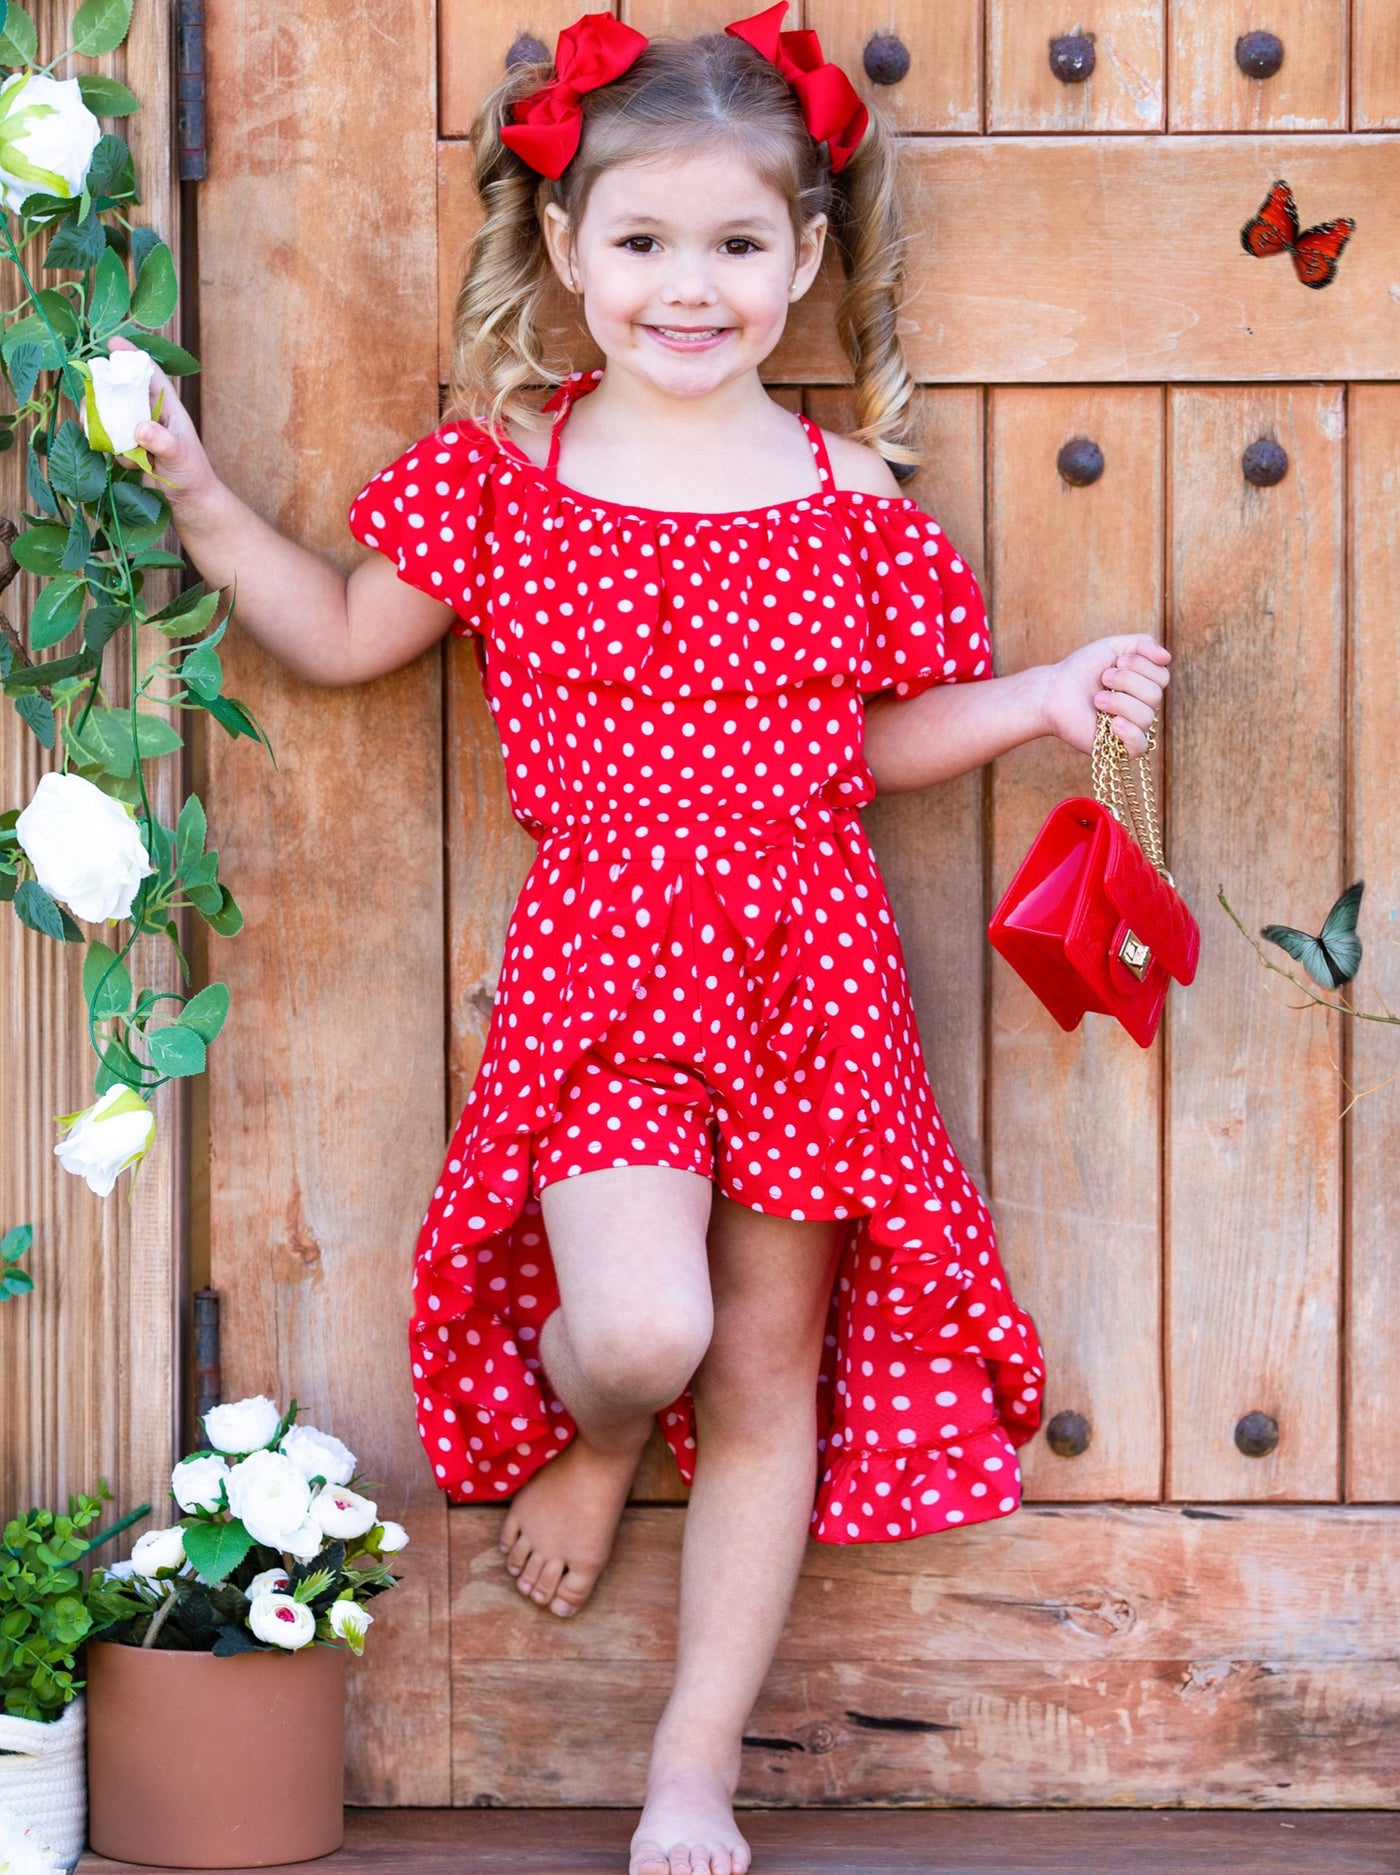 Amazon.com: Polka Dot Print Dress for Kids Girls Summer Sleeveless A-line  Dresses Party Dress Prom Gown Cute (Hot Pink, 5-6 Years) : Sports & Outdoors